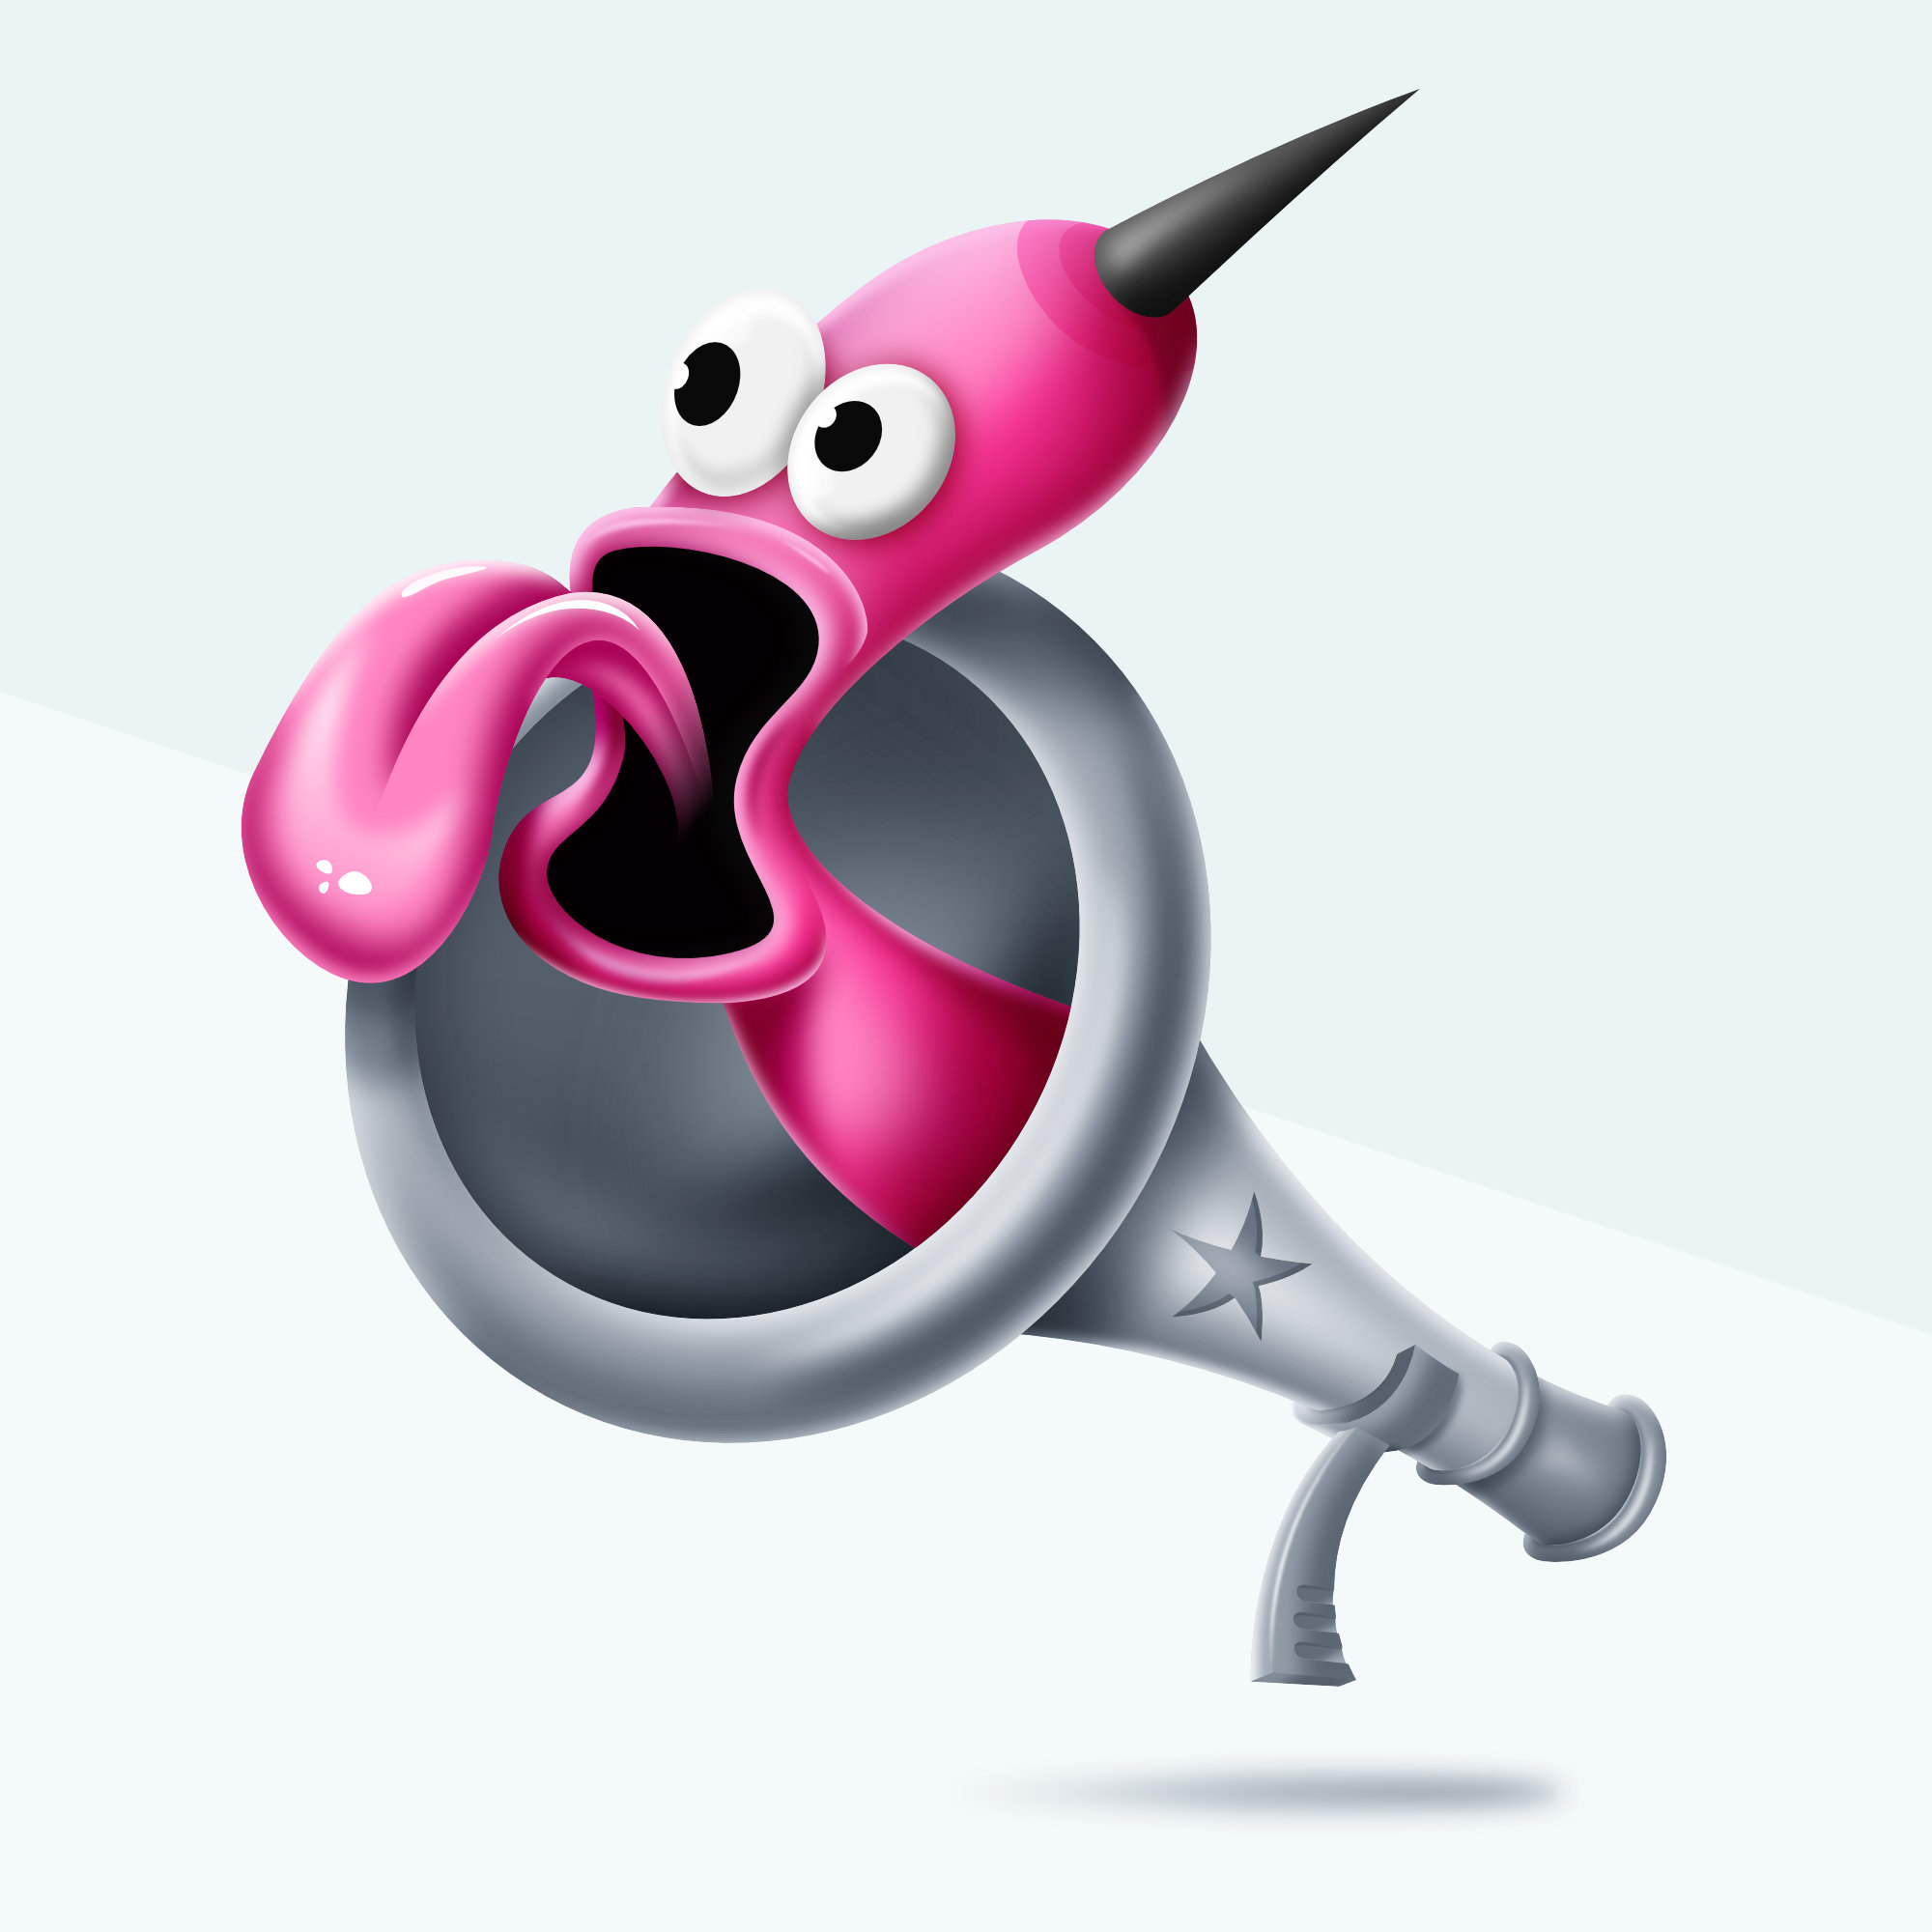 Illustration of a hand-held megaphone with a worm inside who's shouting the clients branding